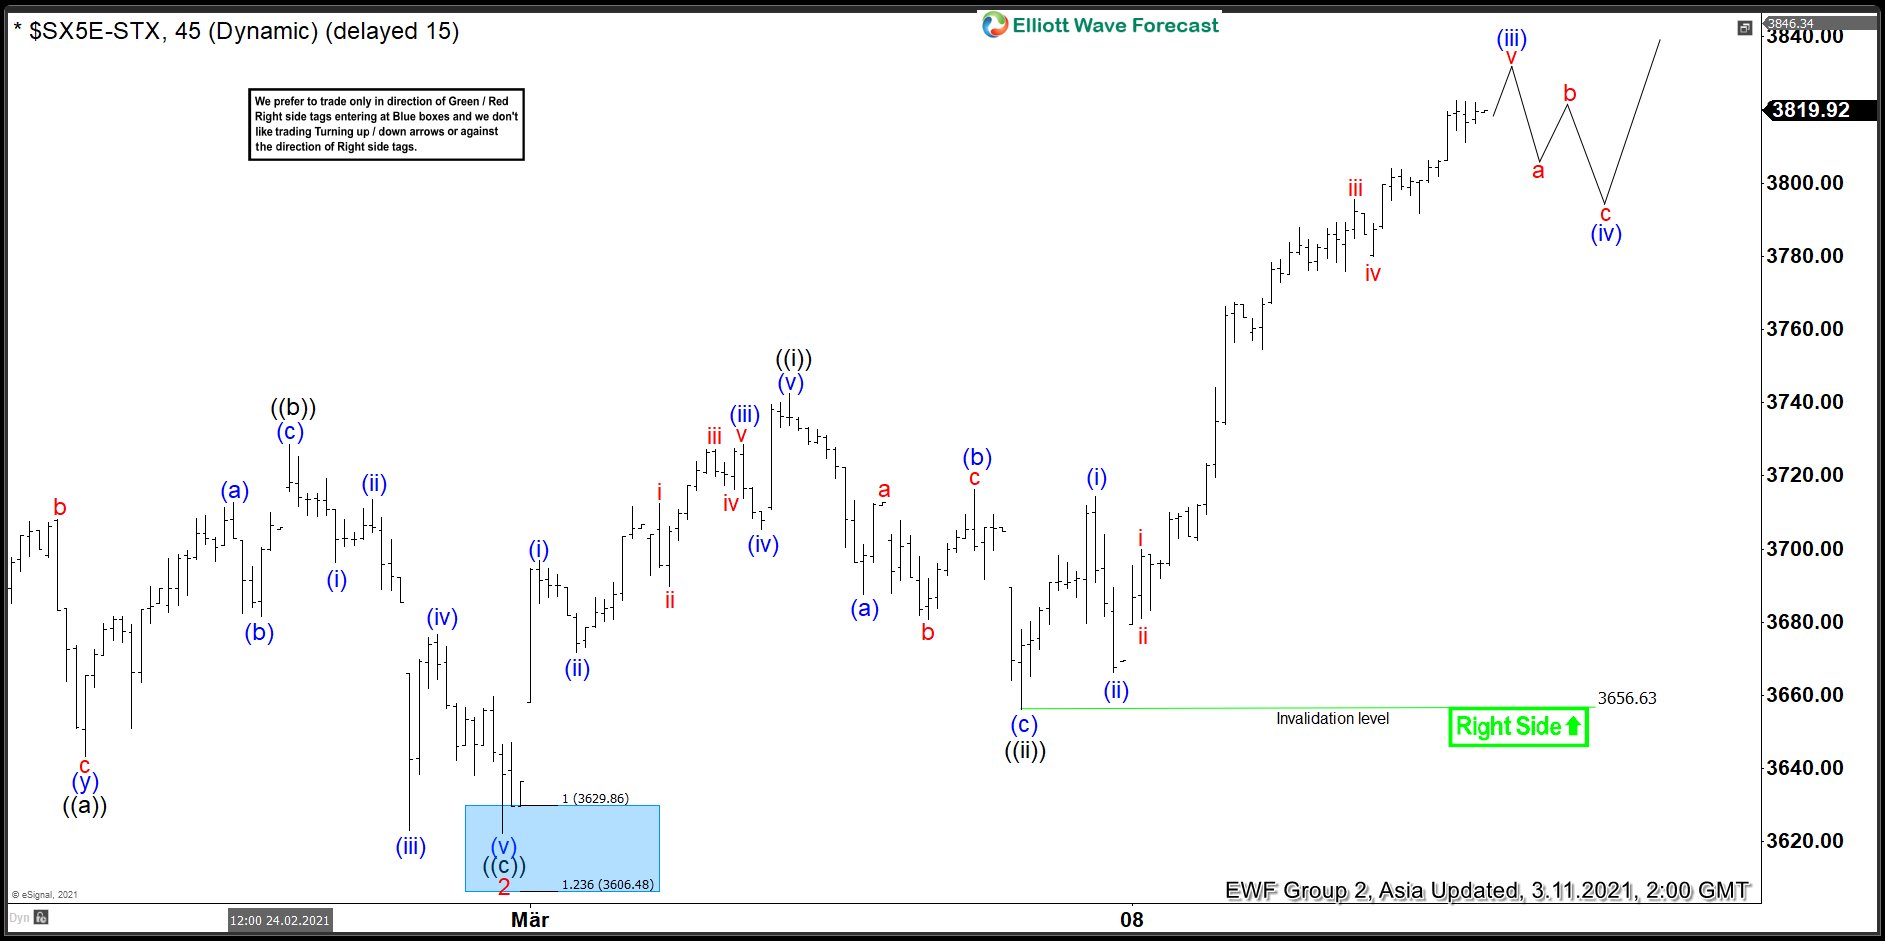 Elliott Wave View: Further Upside Expected in Eurostoxx